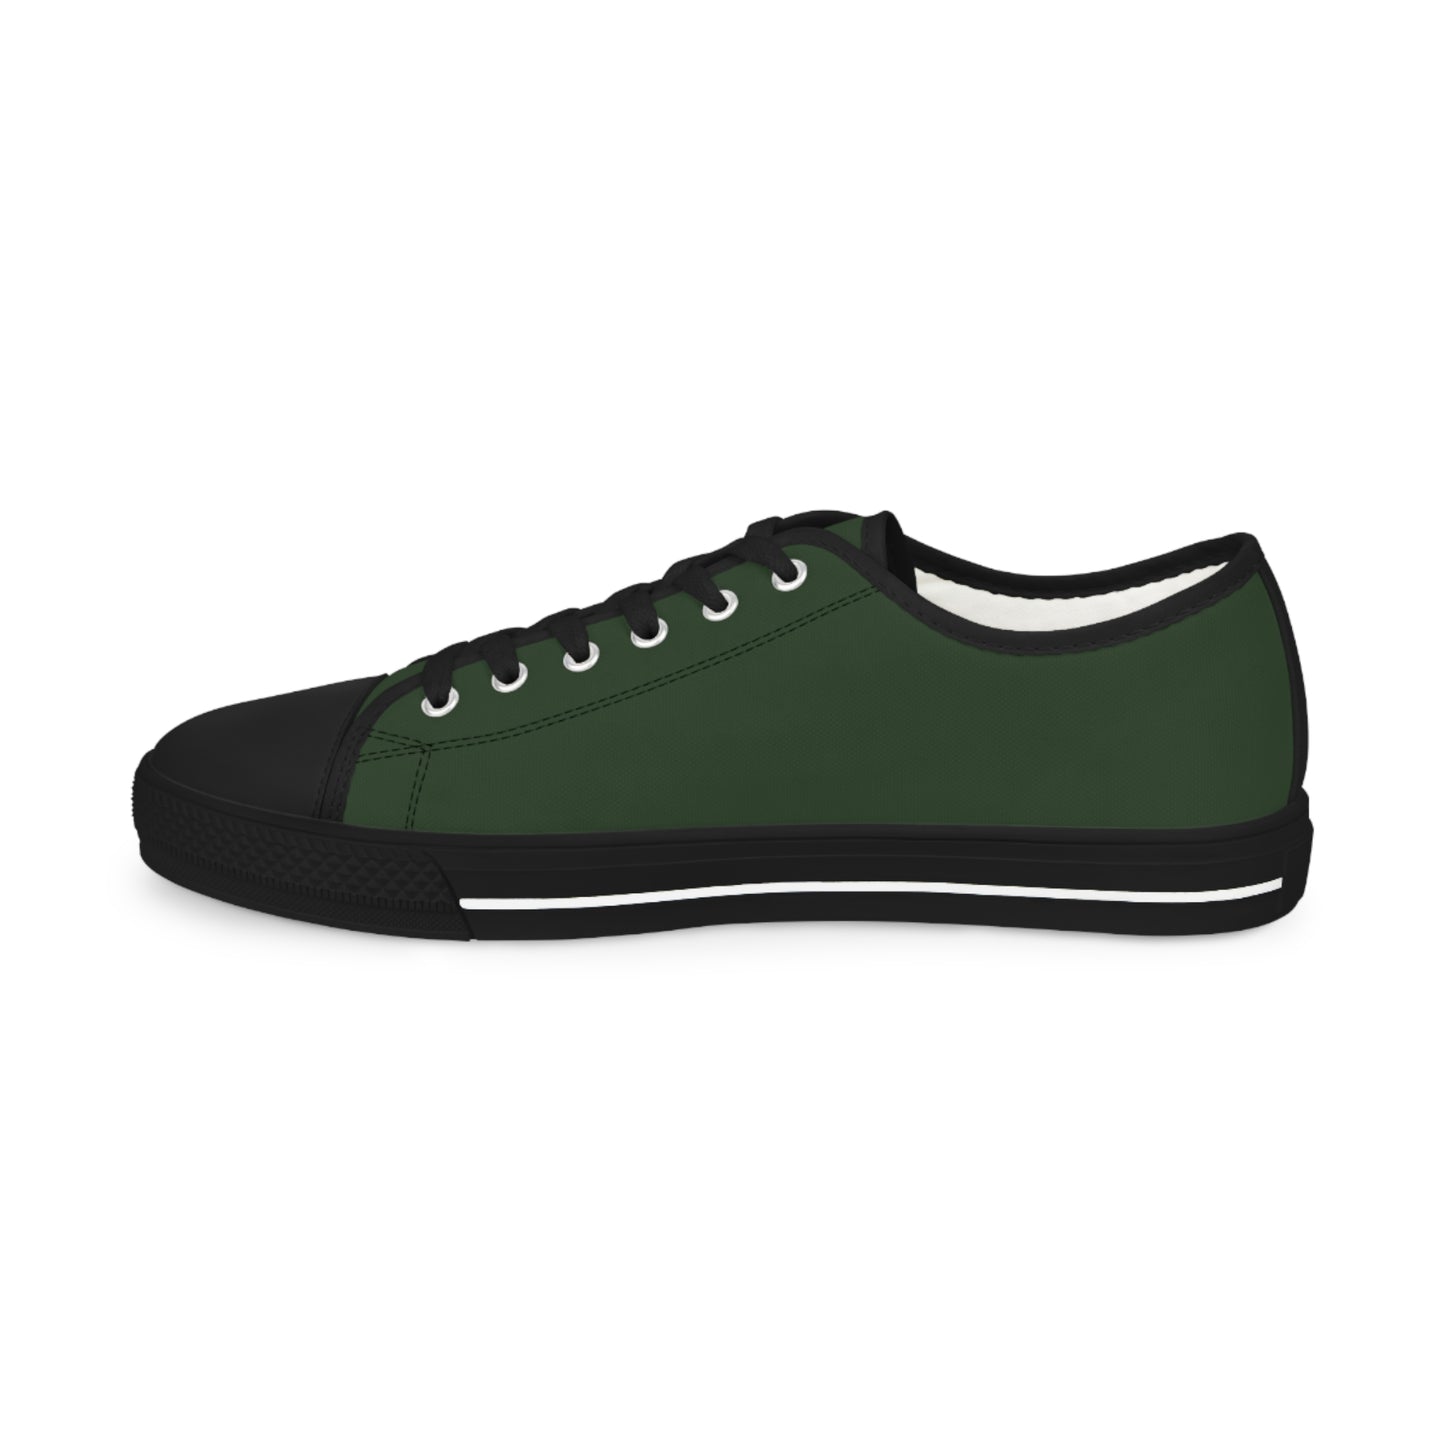 Men's Canvas Low Top Solid Color Sneakers - Hunter Green US 14 Black sole